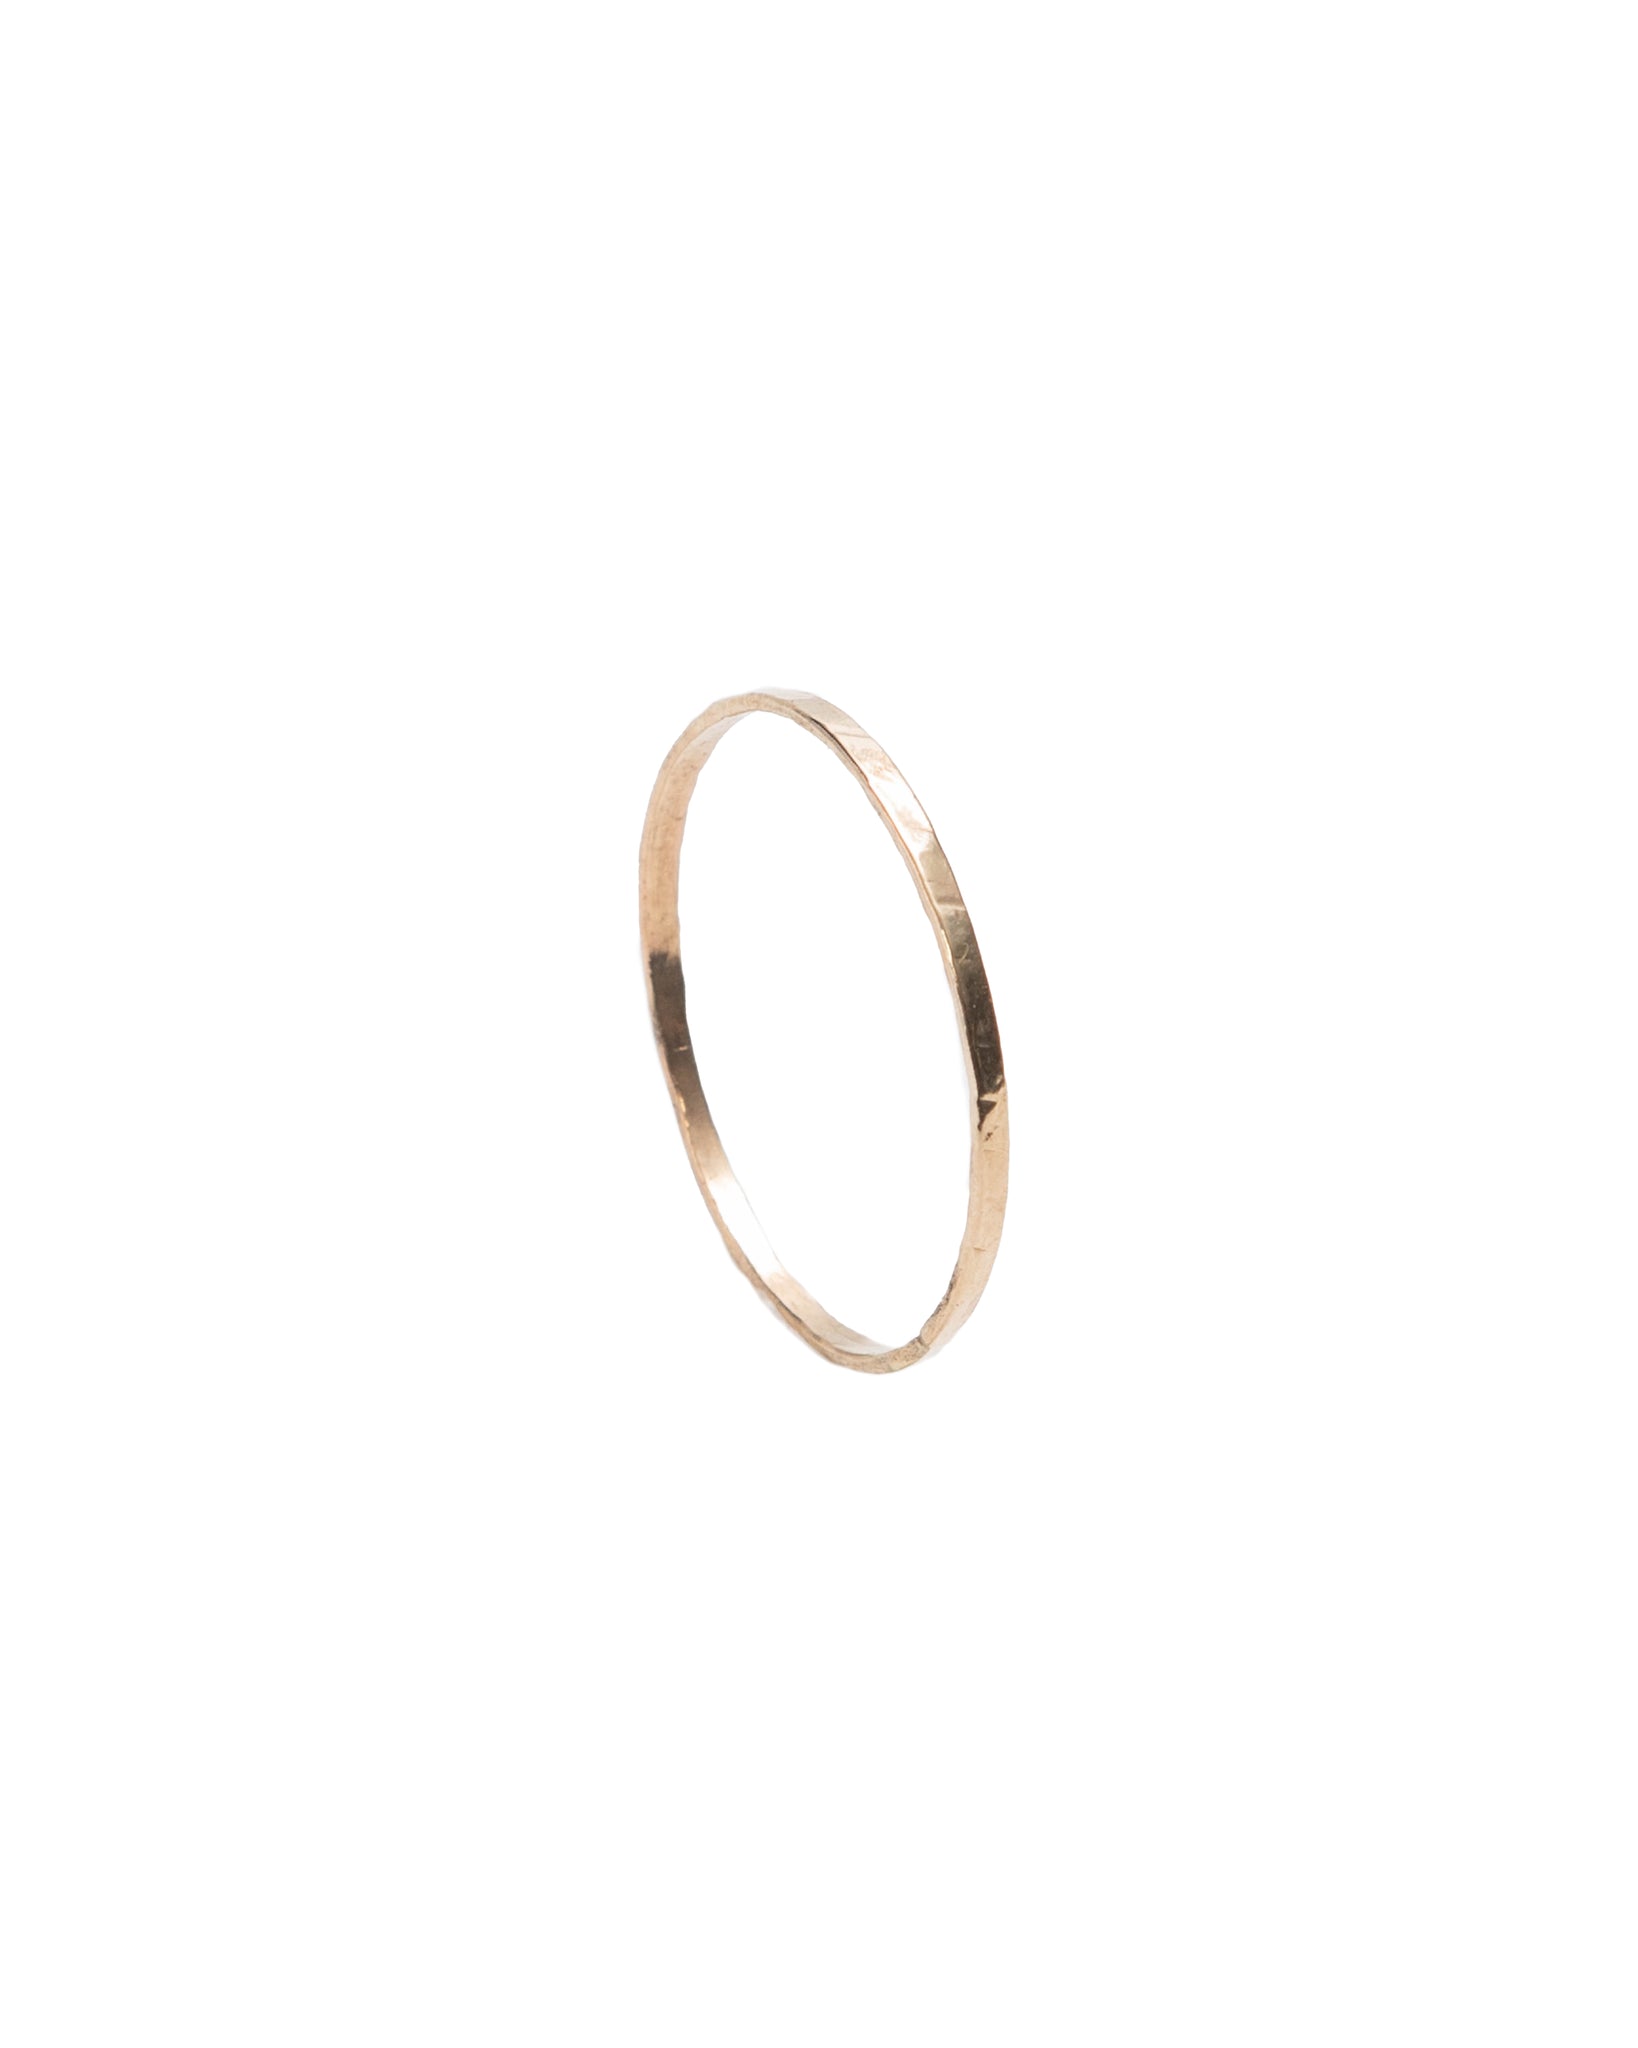 Tiny 14K Gold Hammered Stacking Ring